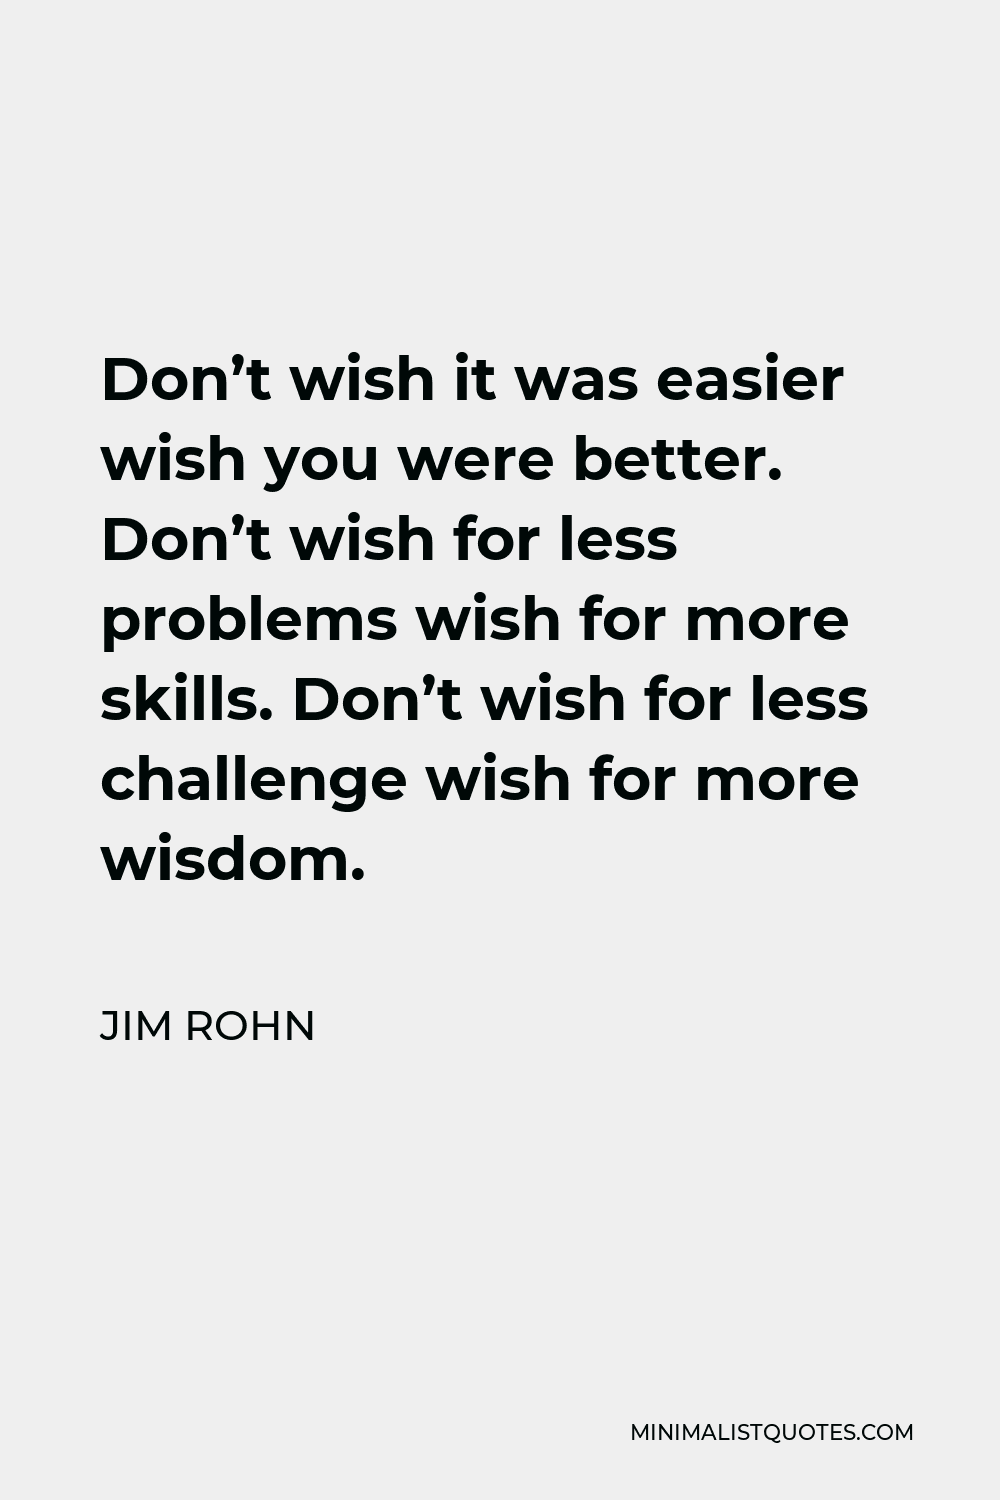 Jim Rohn Quote - Don’t wish it was easier wish you were better. Don’t wish for less problems wish for more skills. Don’t wish for less challenge wish for more wisdom.